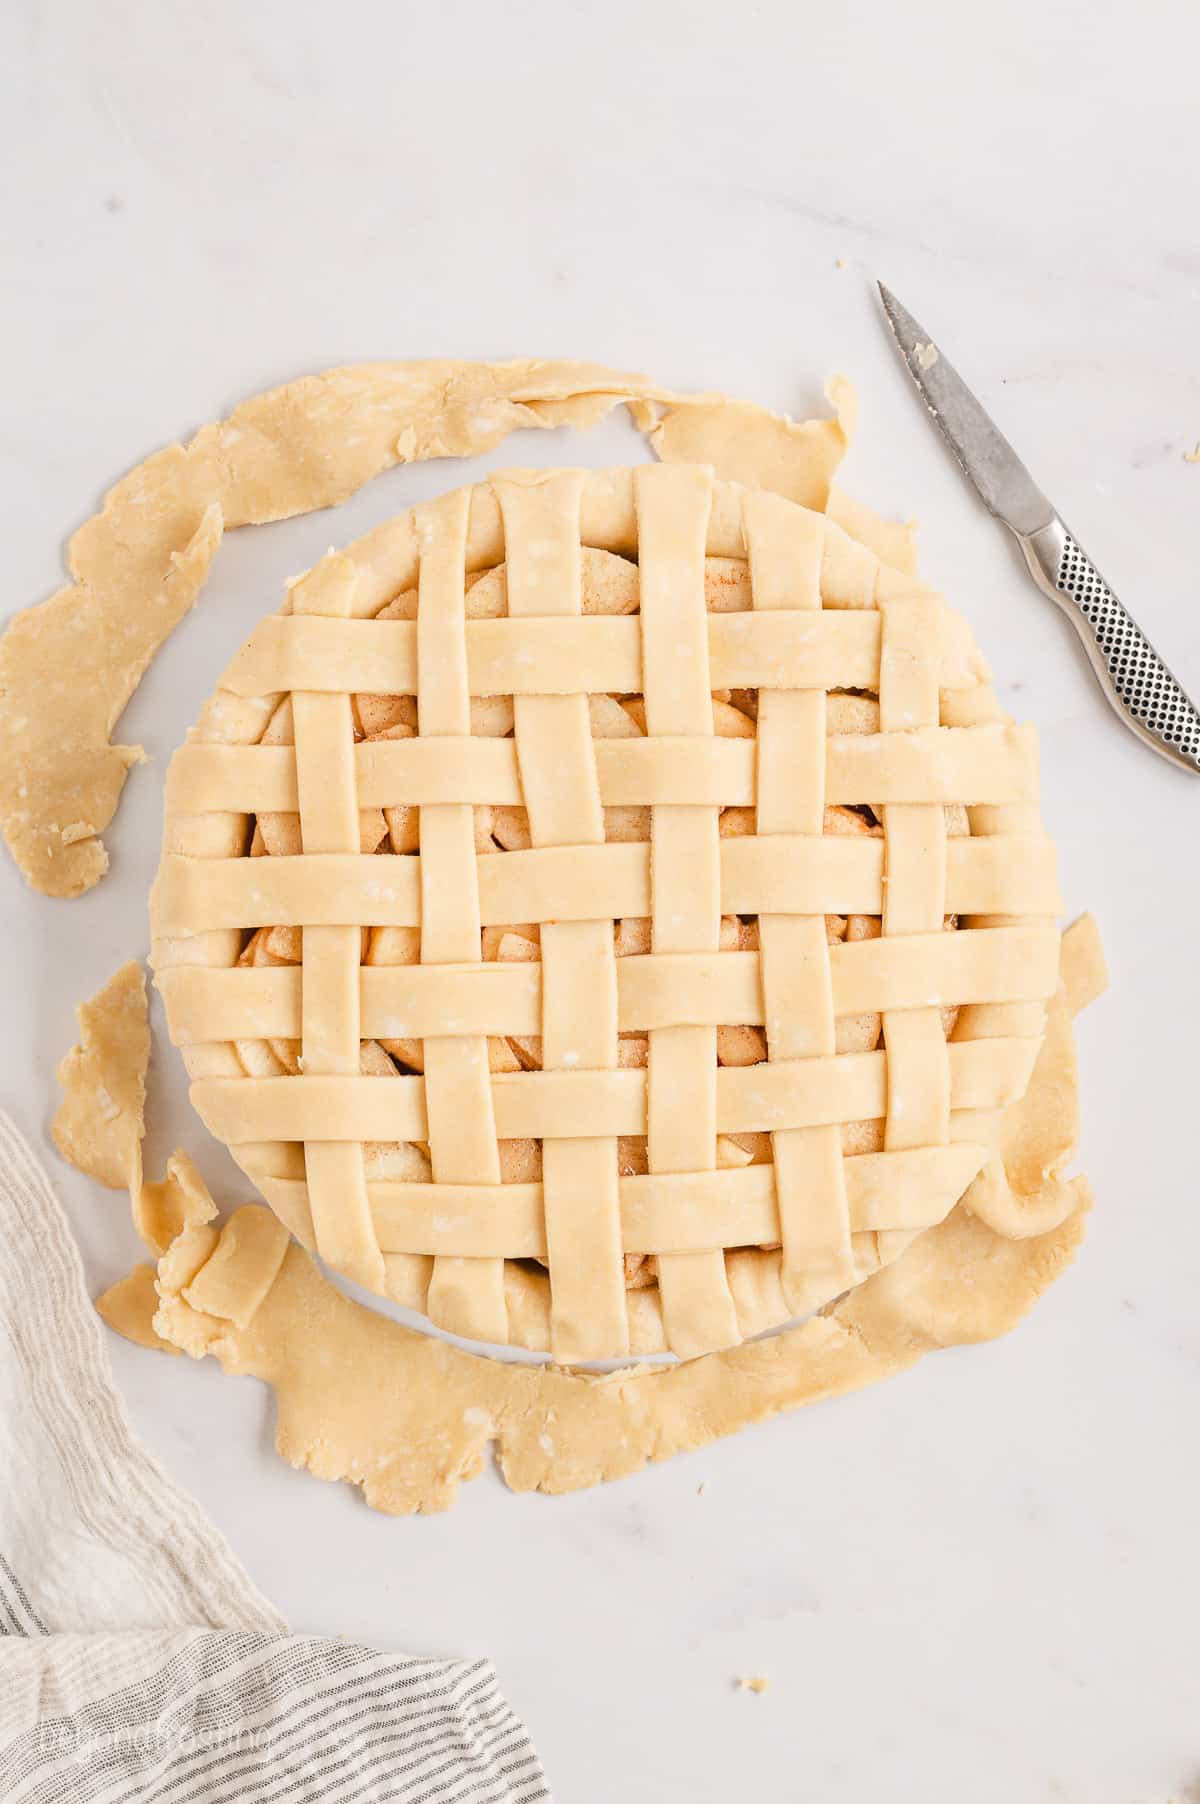 Trimmed lattice strips woven over a filled pie crust.